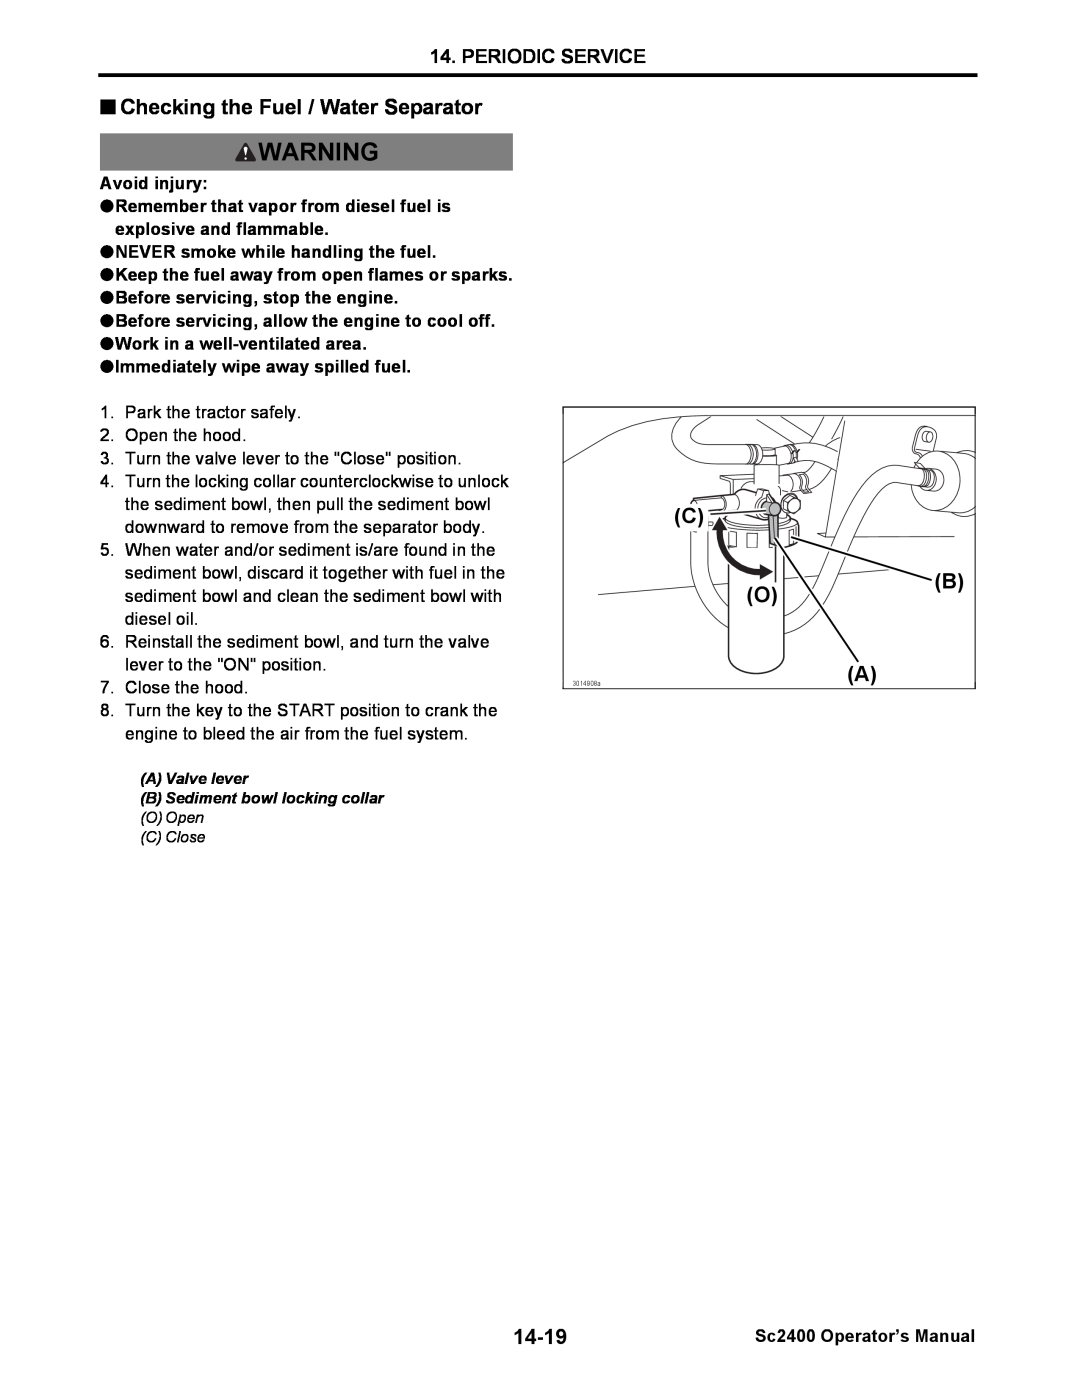 Cub Cadet SC2400 Periodic Service, 14-19, Avoid injury, NEVER smoke while handling the fuel, Sc2400 Operator’s Manual 